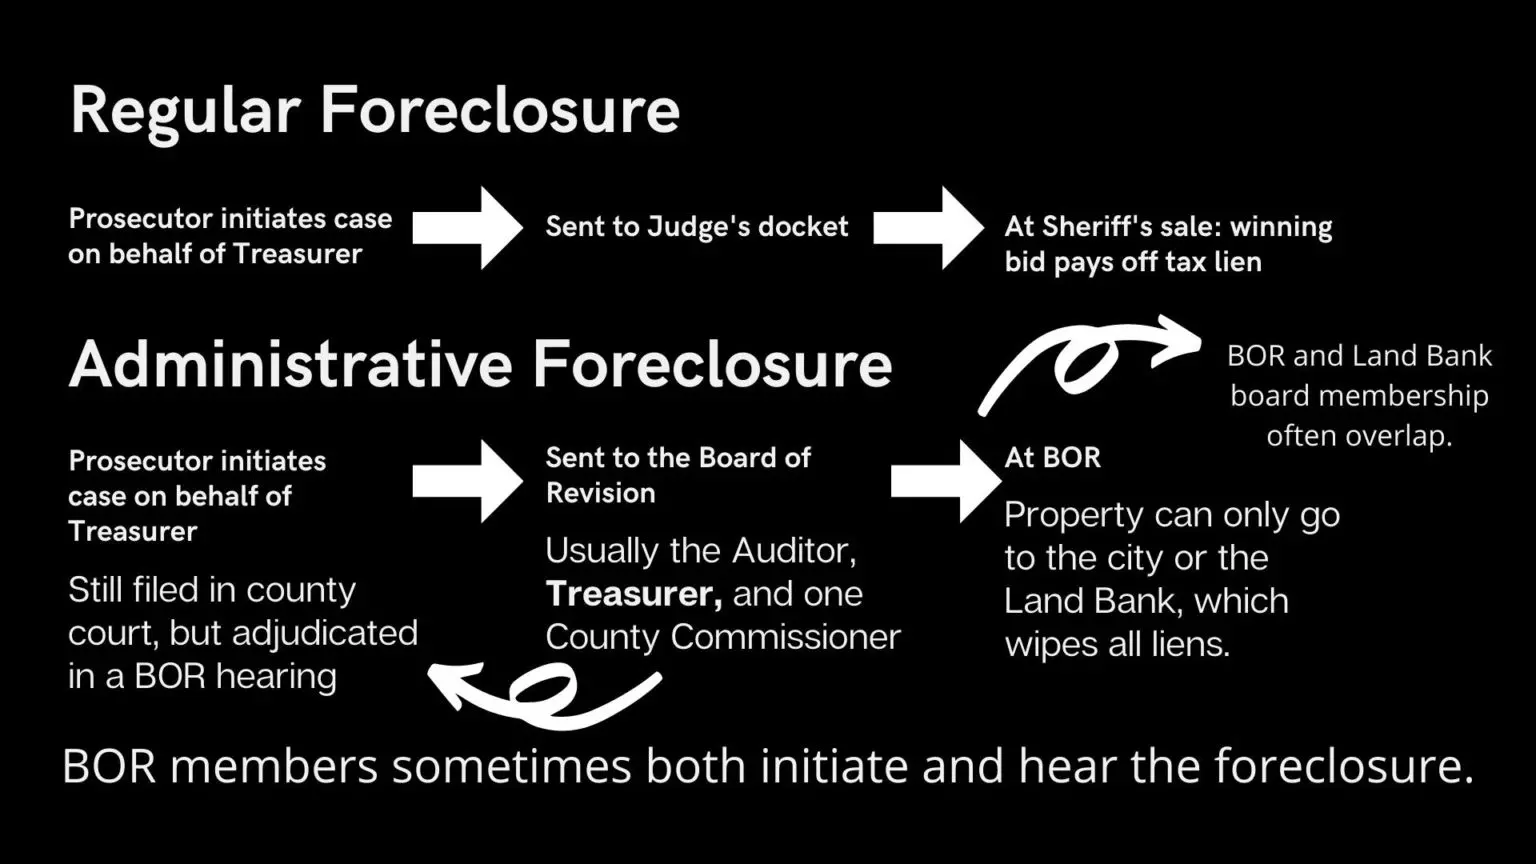 Process map comparing a regular foreclosure process with an adinistrative foreclosure process, where the Board of Revisions overlaps with the land bank board.